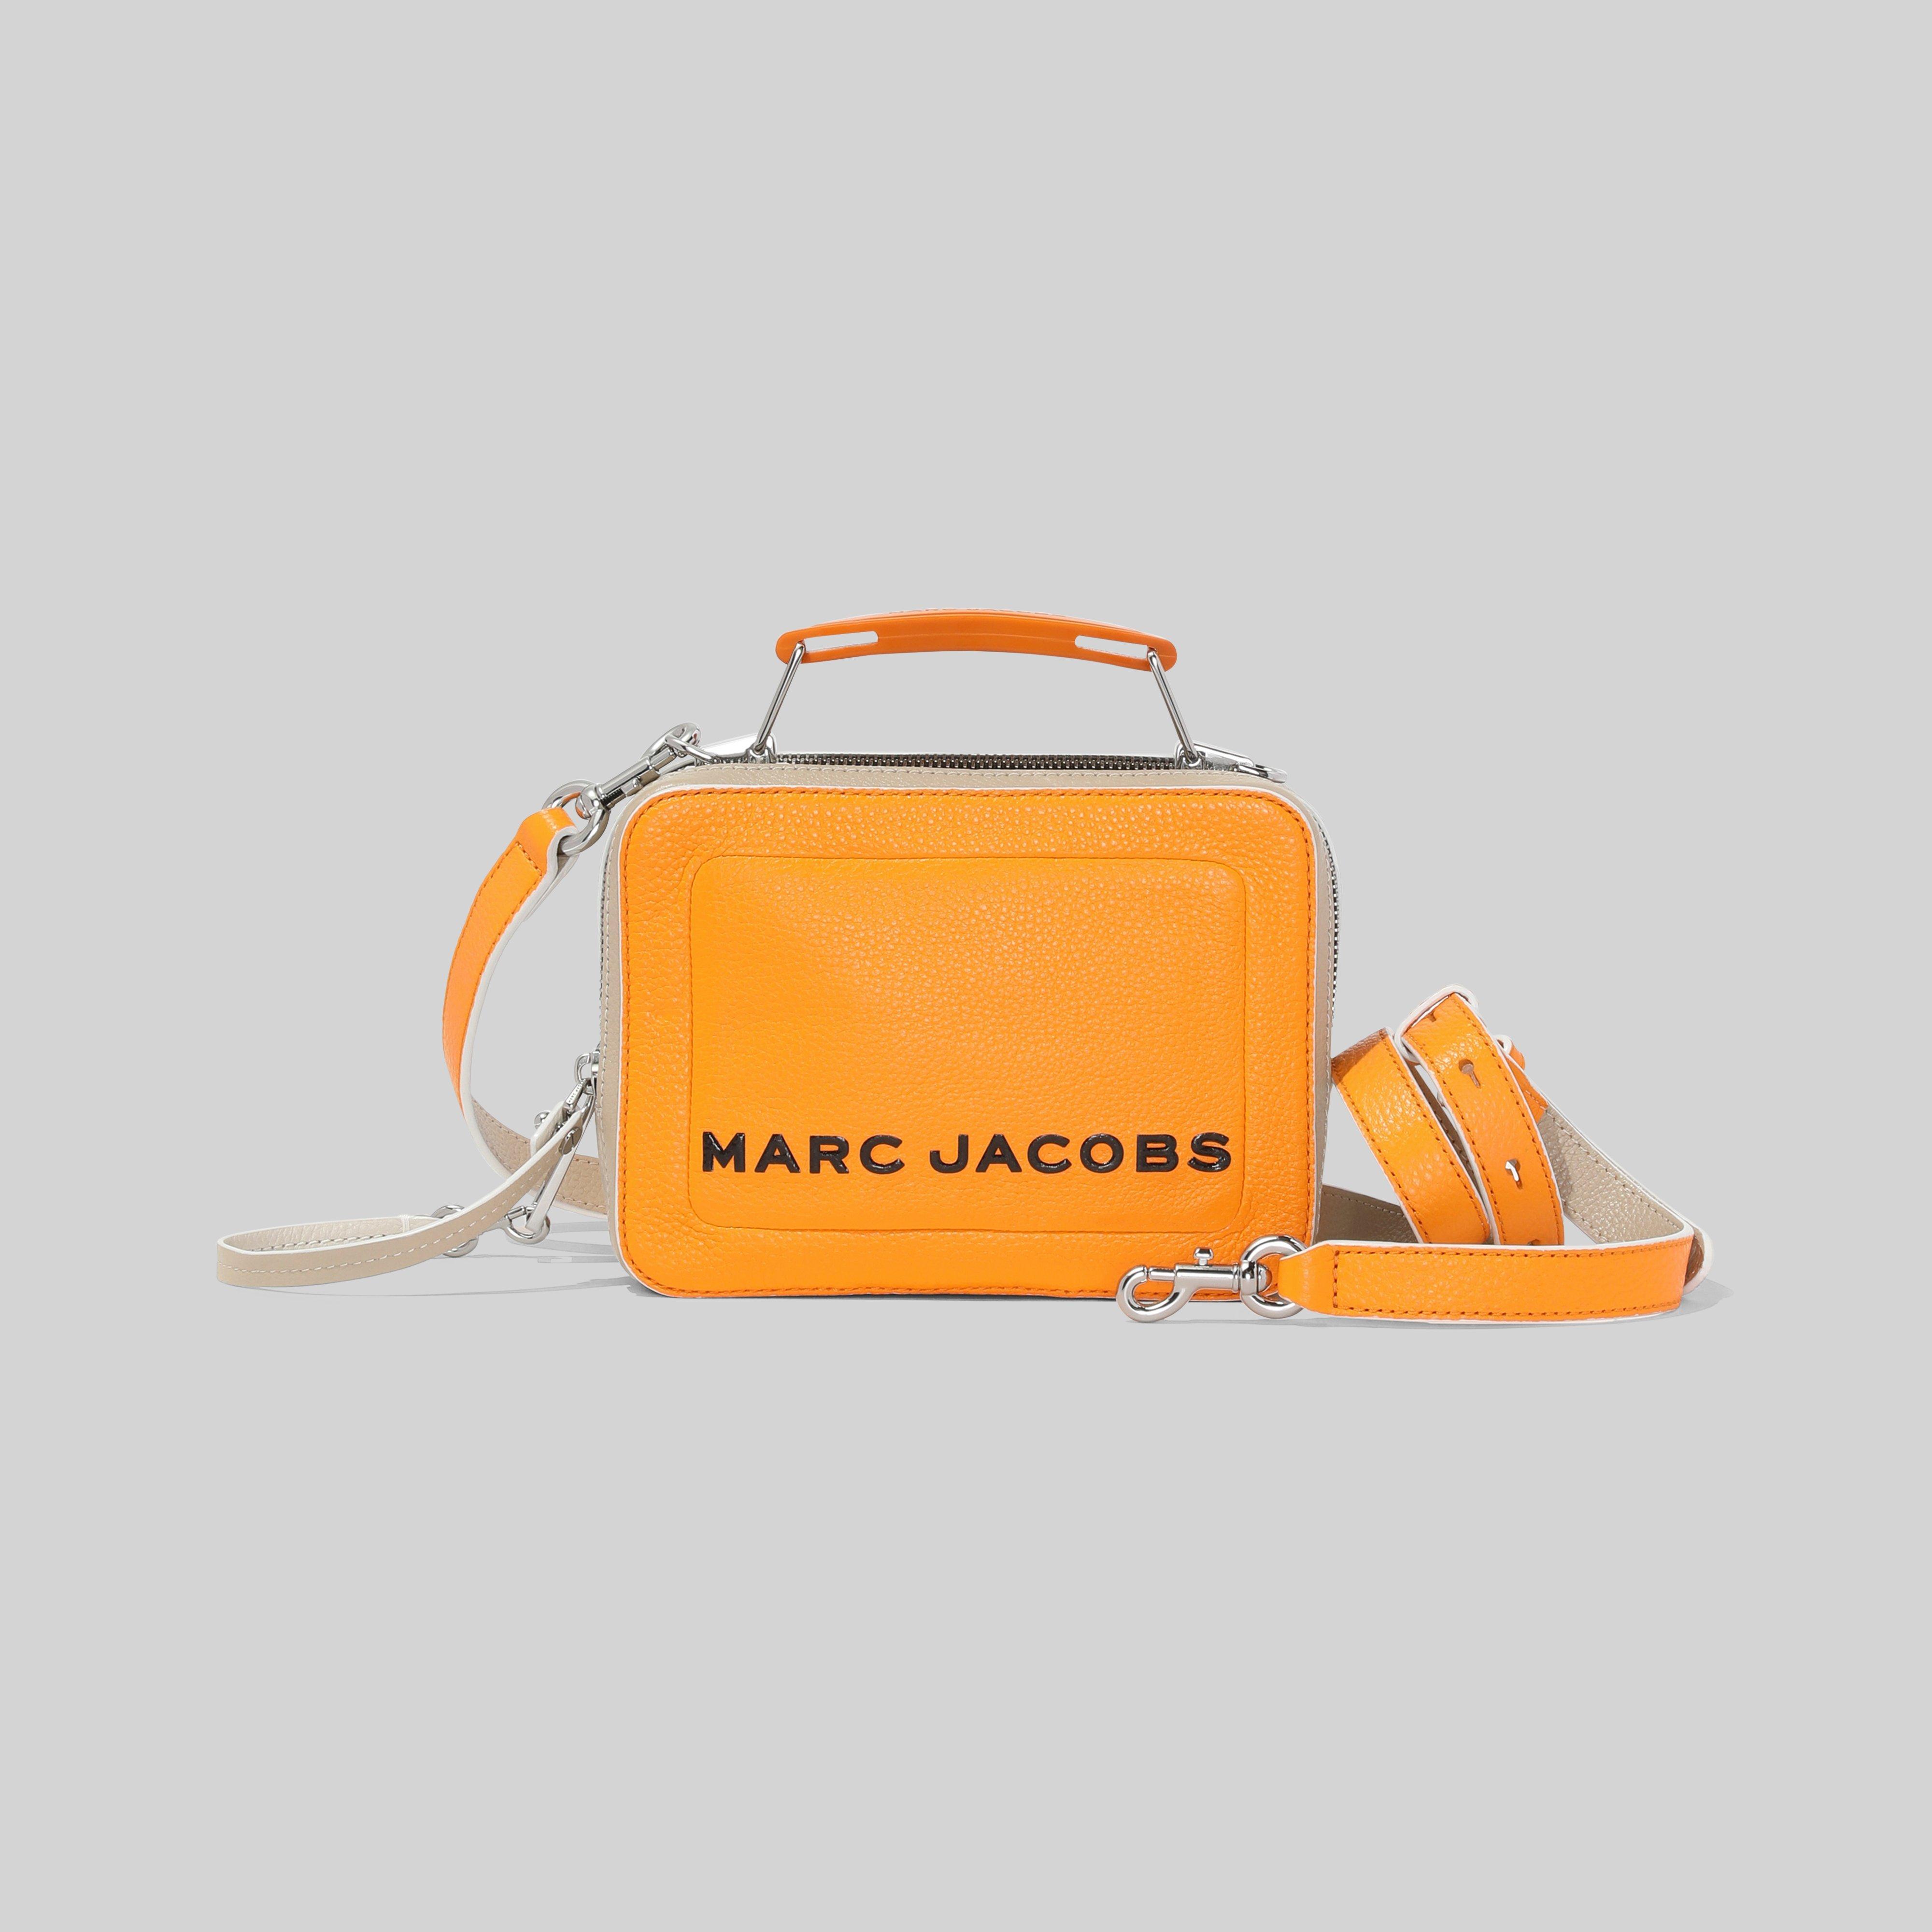 Marc Jacobs The Colorblock Textured Mini Box Bag in Orange | Lyst